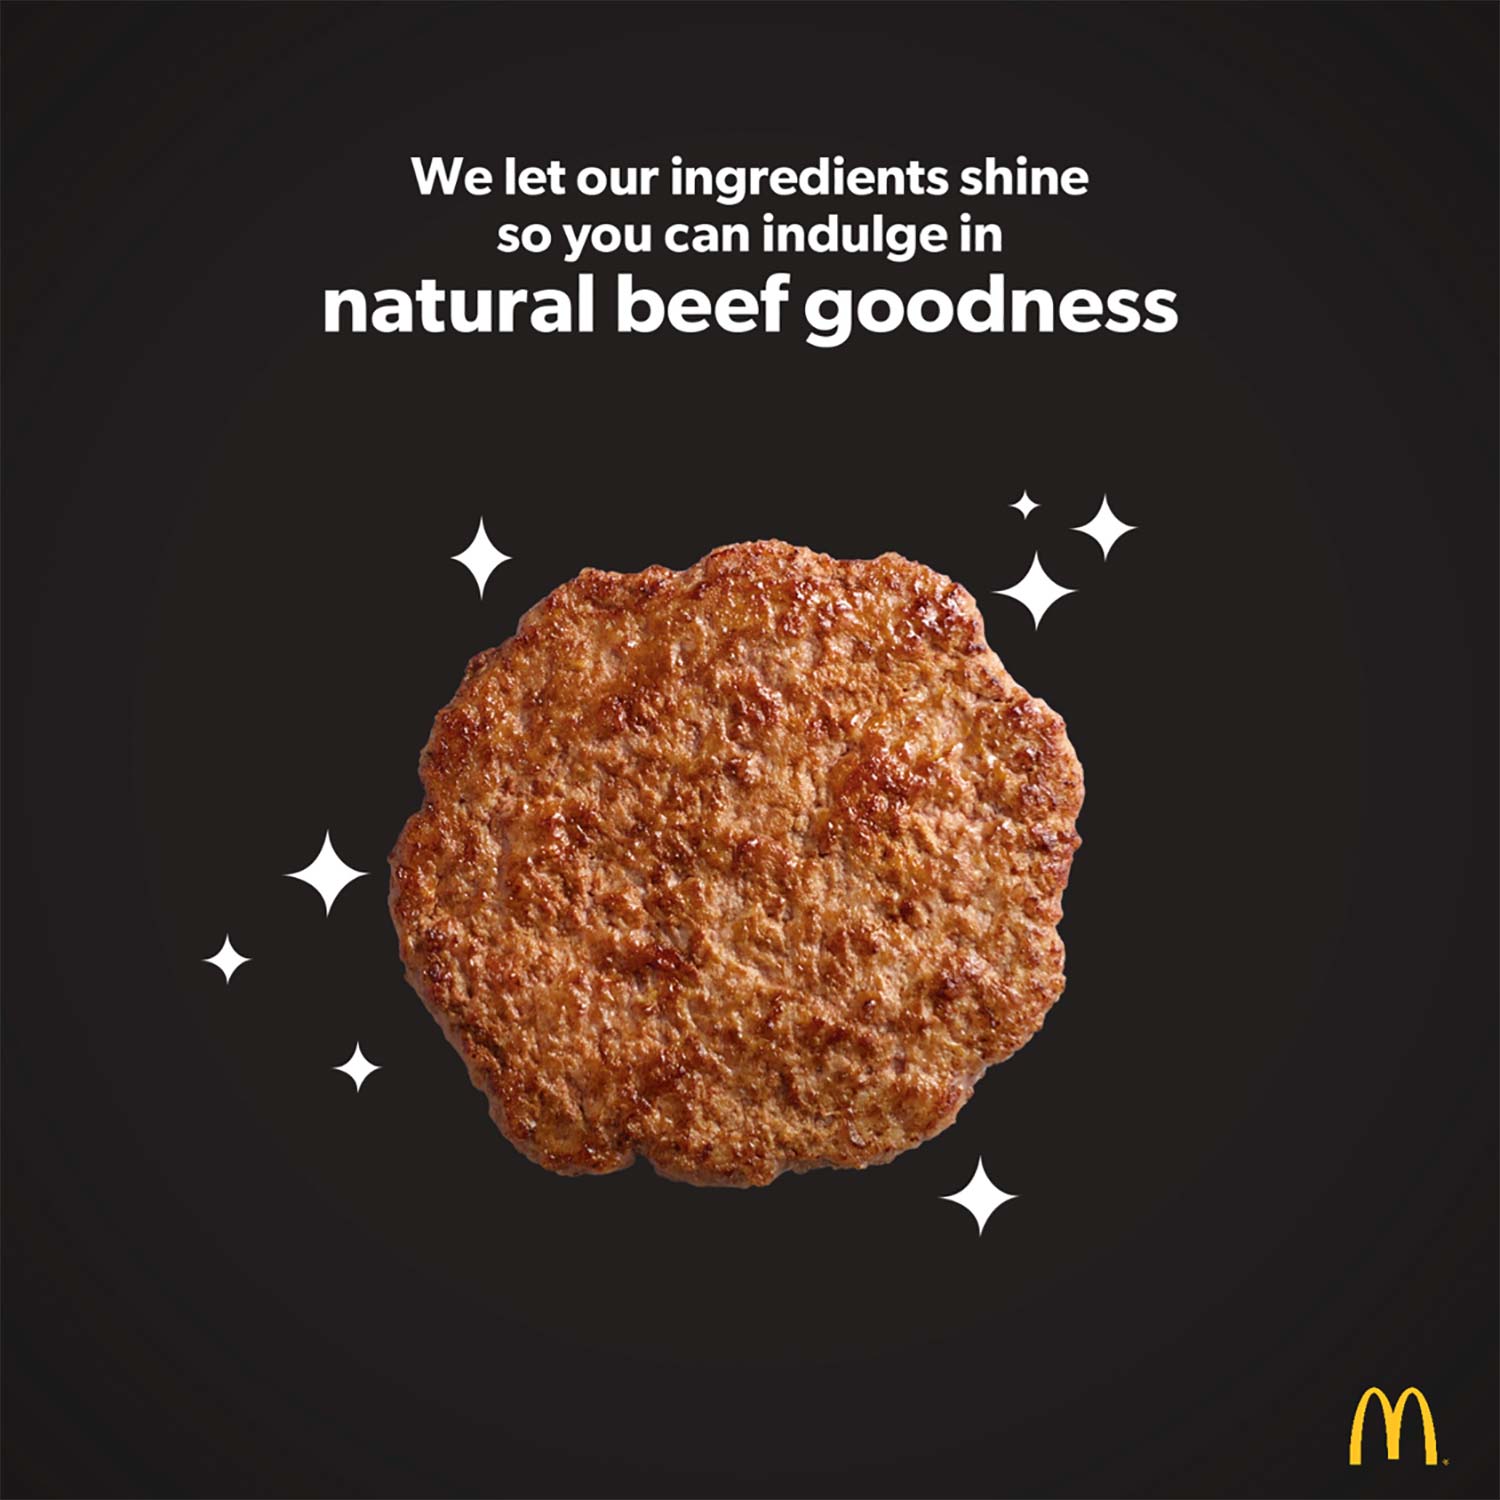 McDonald's Introduce 100% Angus Beef to the Signature Collection